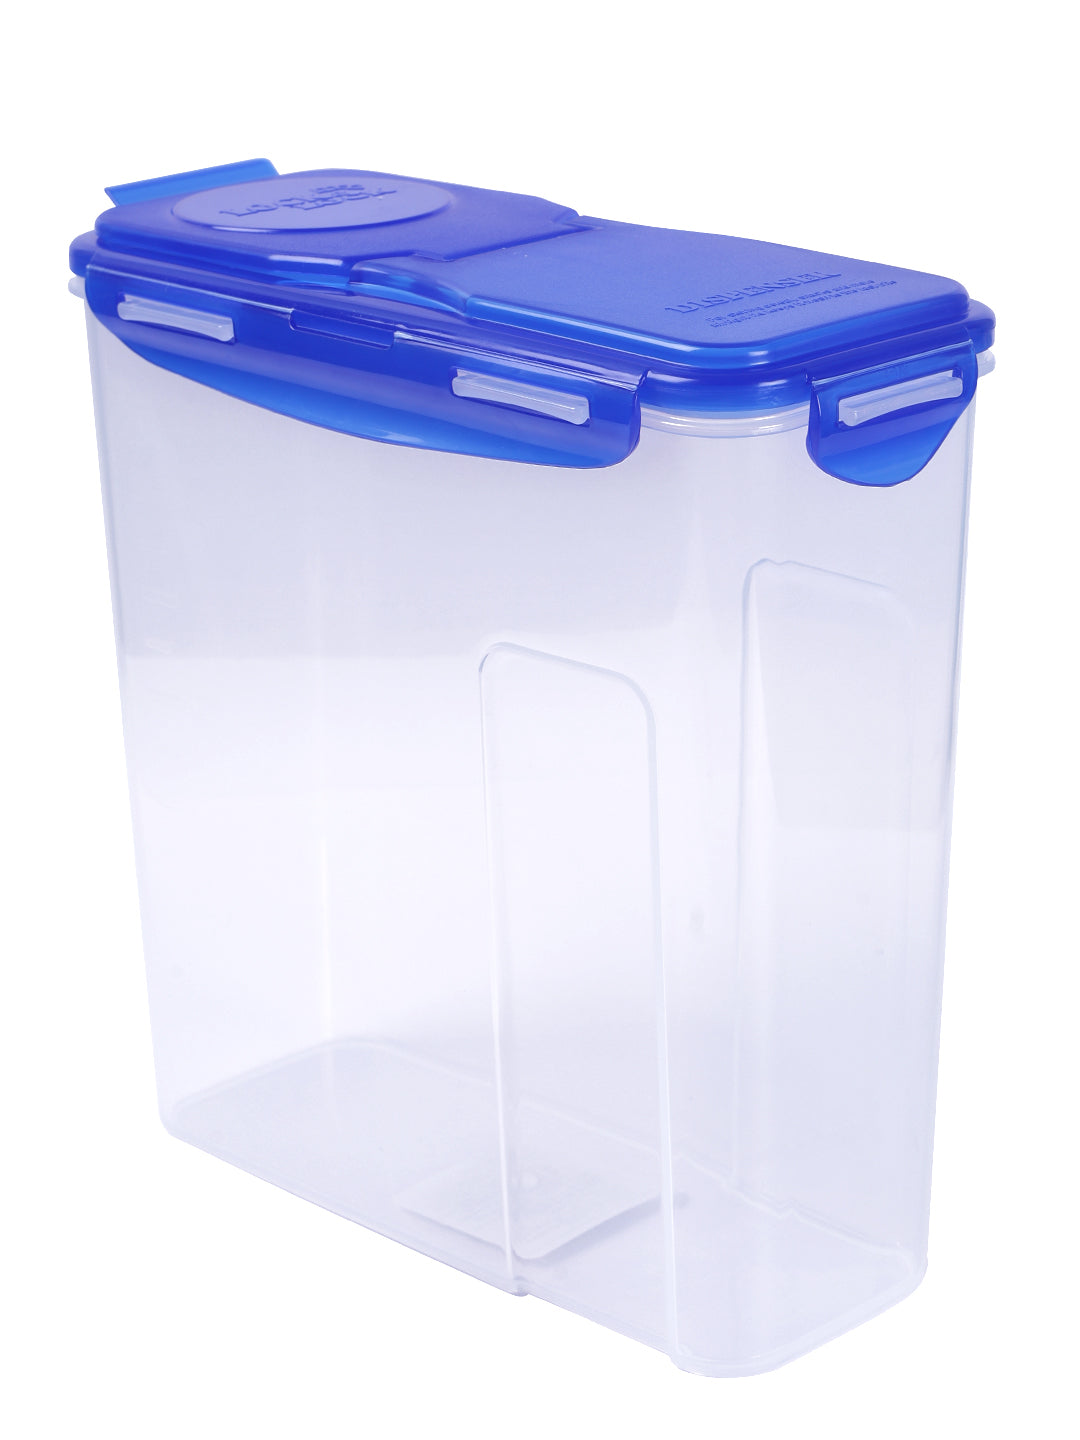 Cereal Dispenser/Rice Container - 3.9 LTR